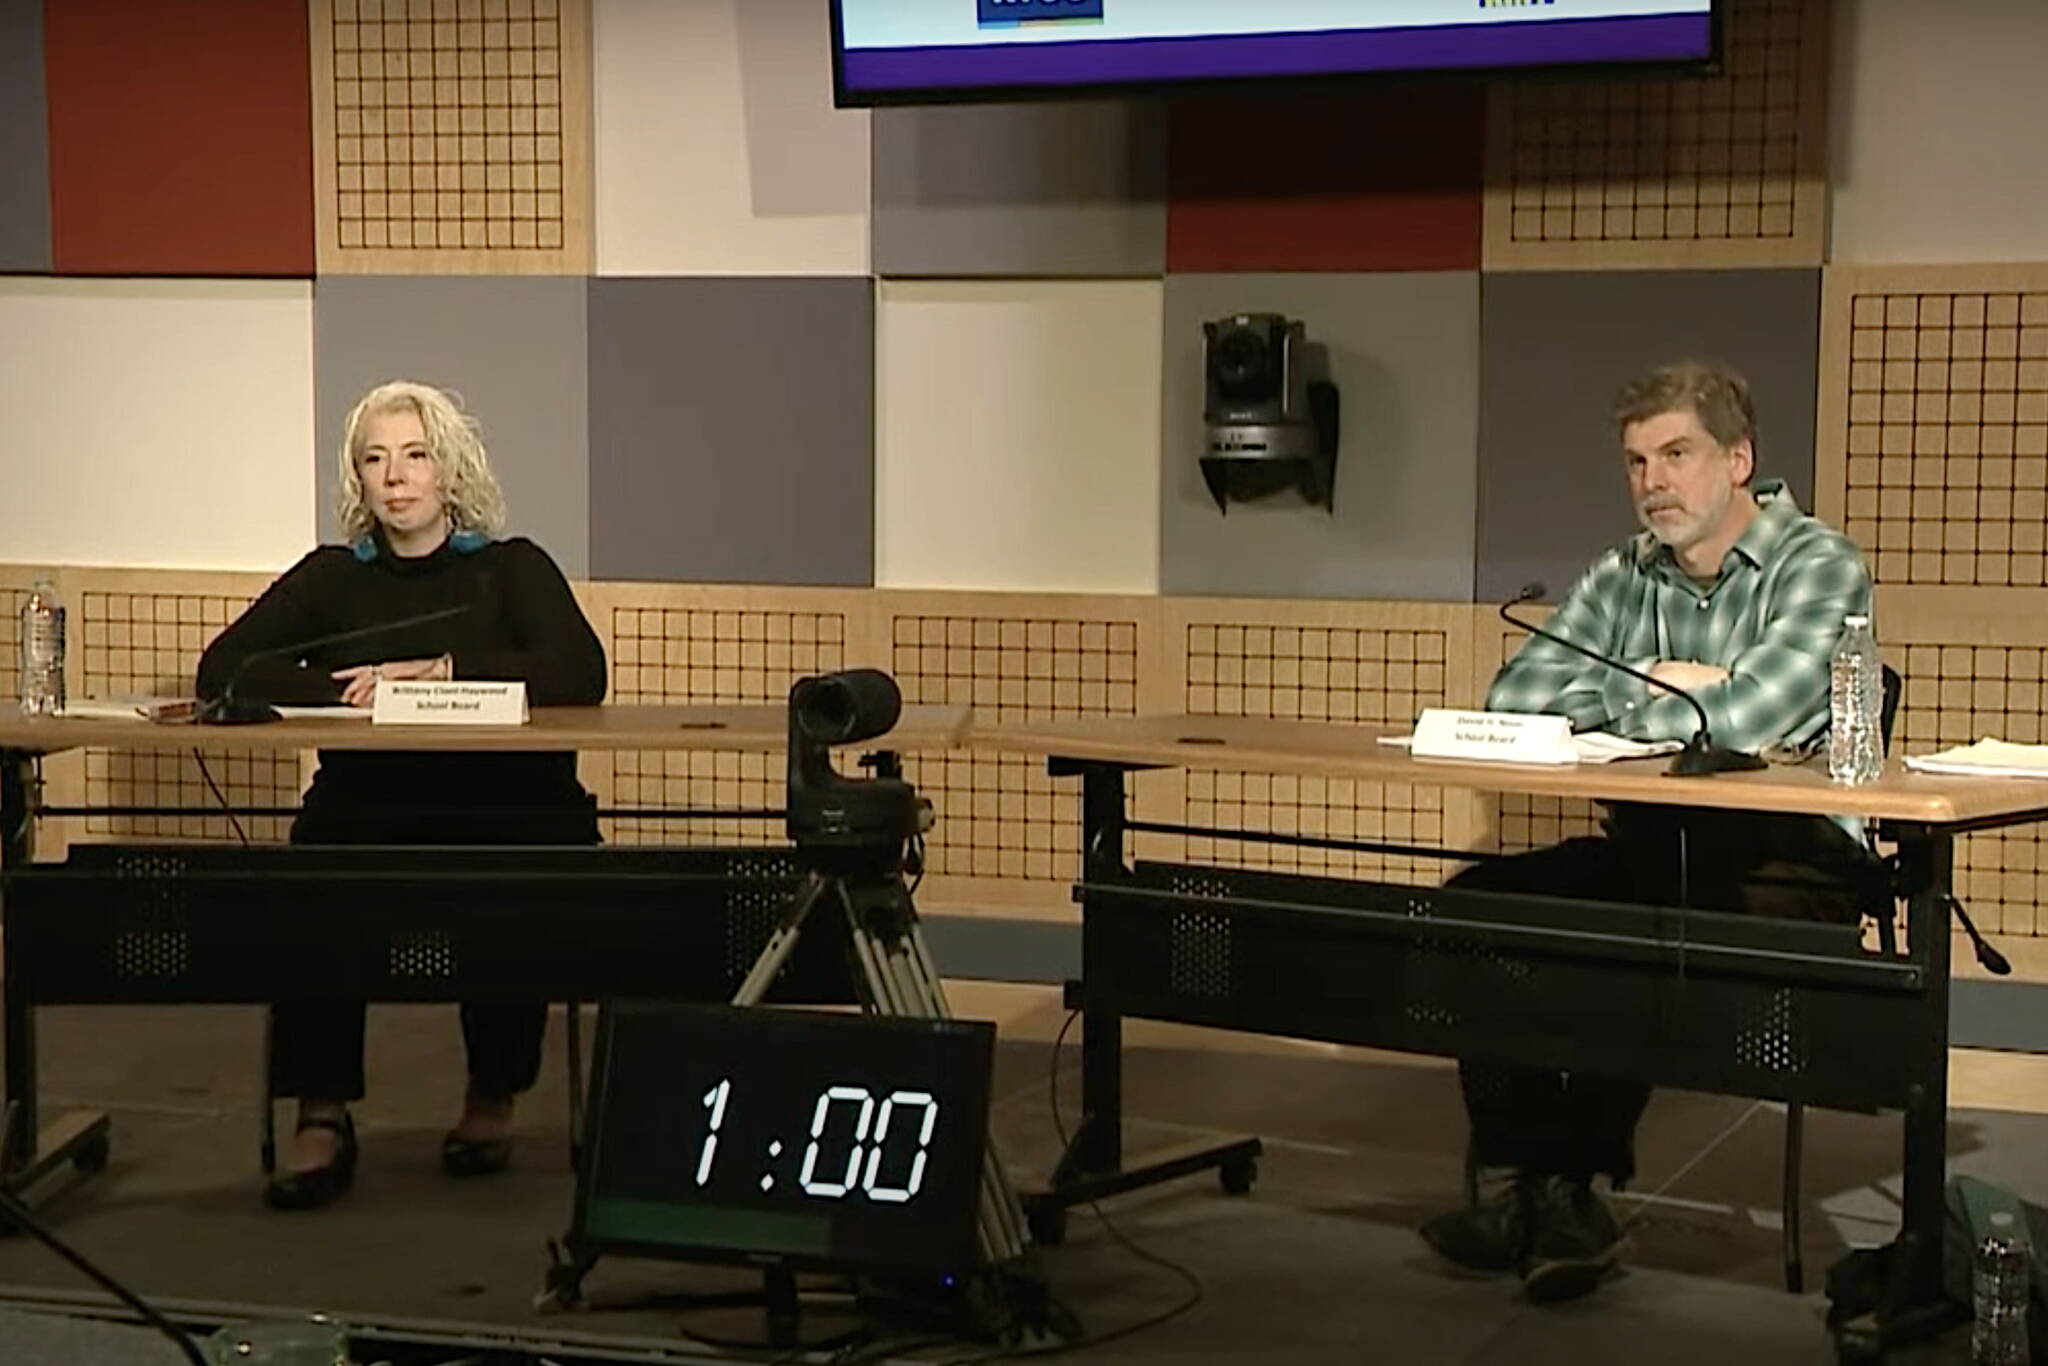 Britteny Cioni-Haywood and David Noon discuss local education issues during the Board of Education candidates portion of a forum Wednesday night at the KTOO studio. (Screenshot from shared video of forum)